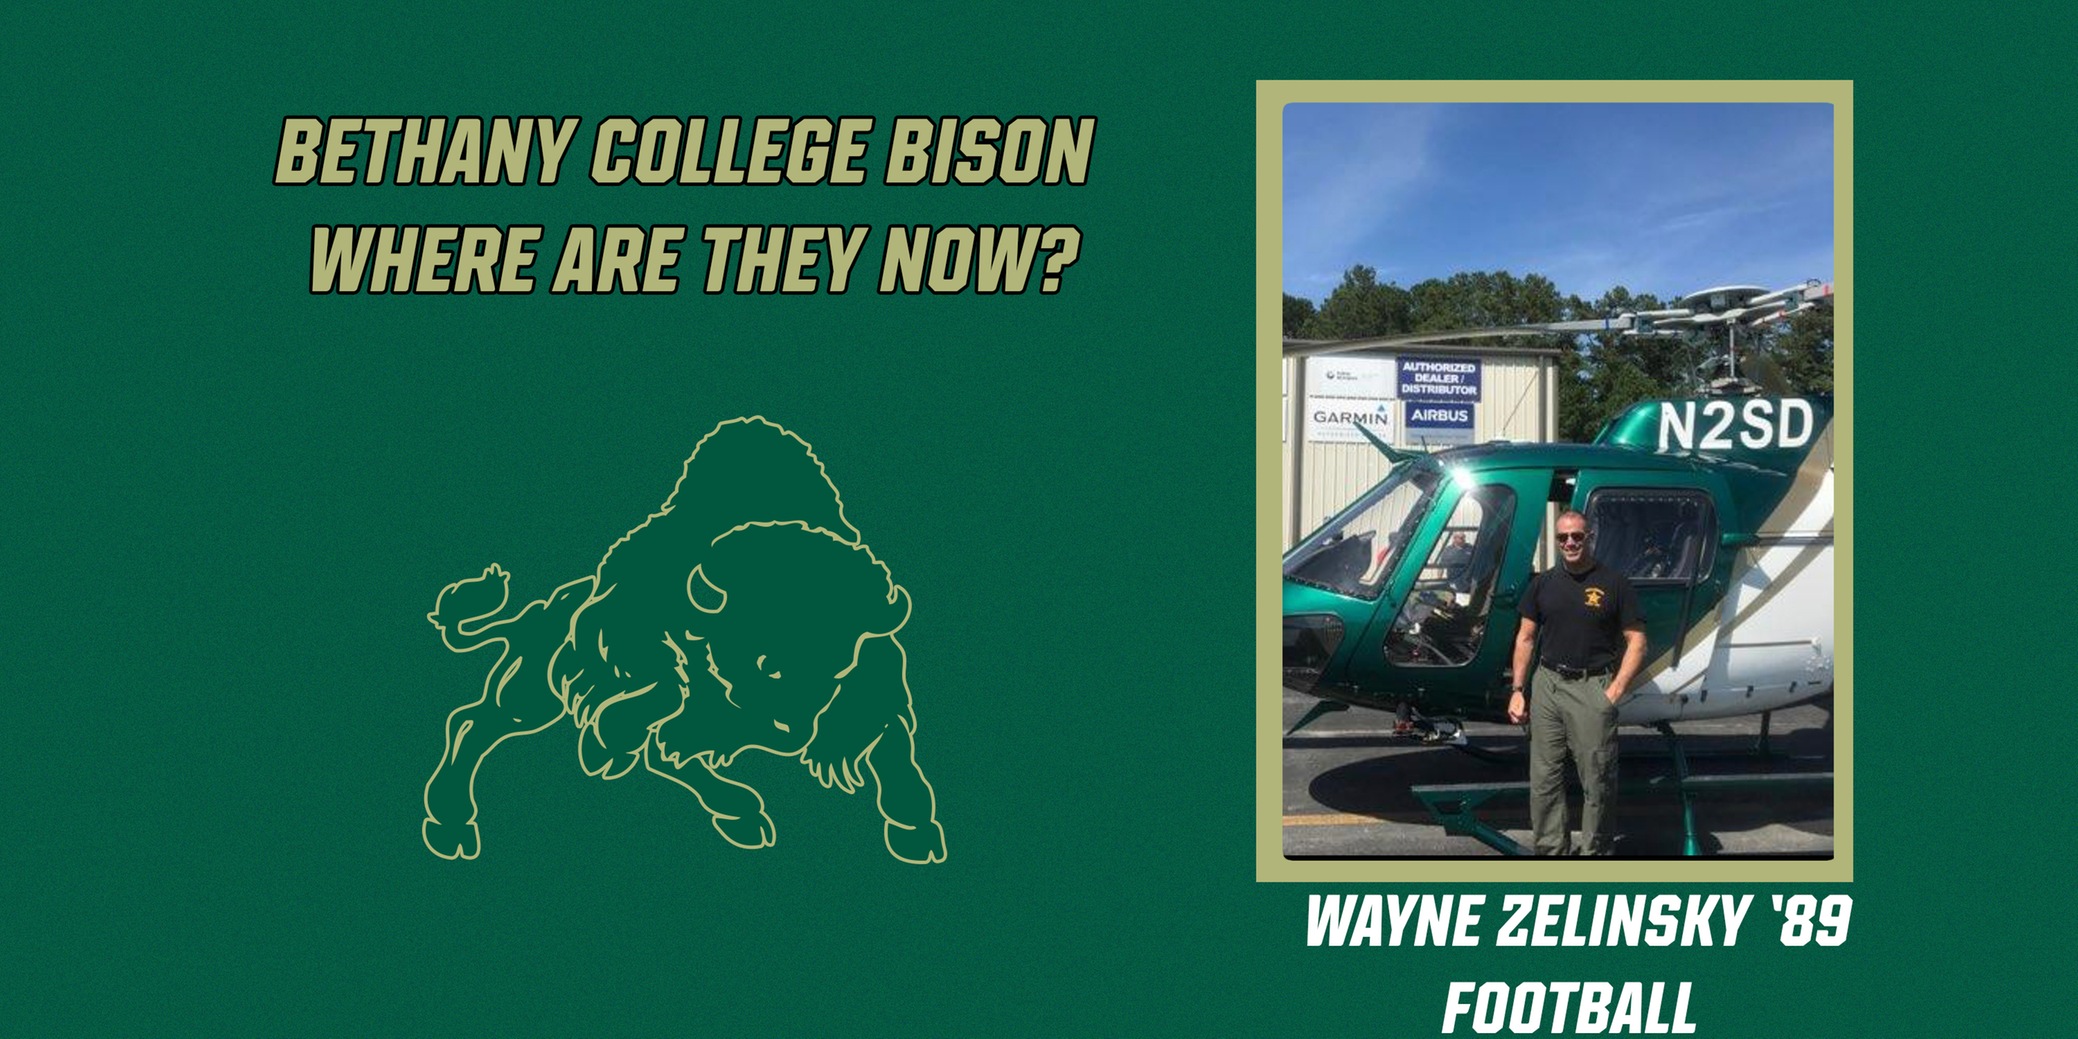 Where Are They Now Series - Wayne Zelinsky '89, Football